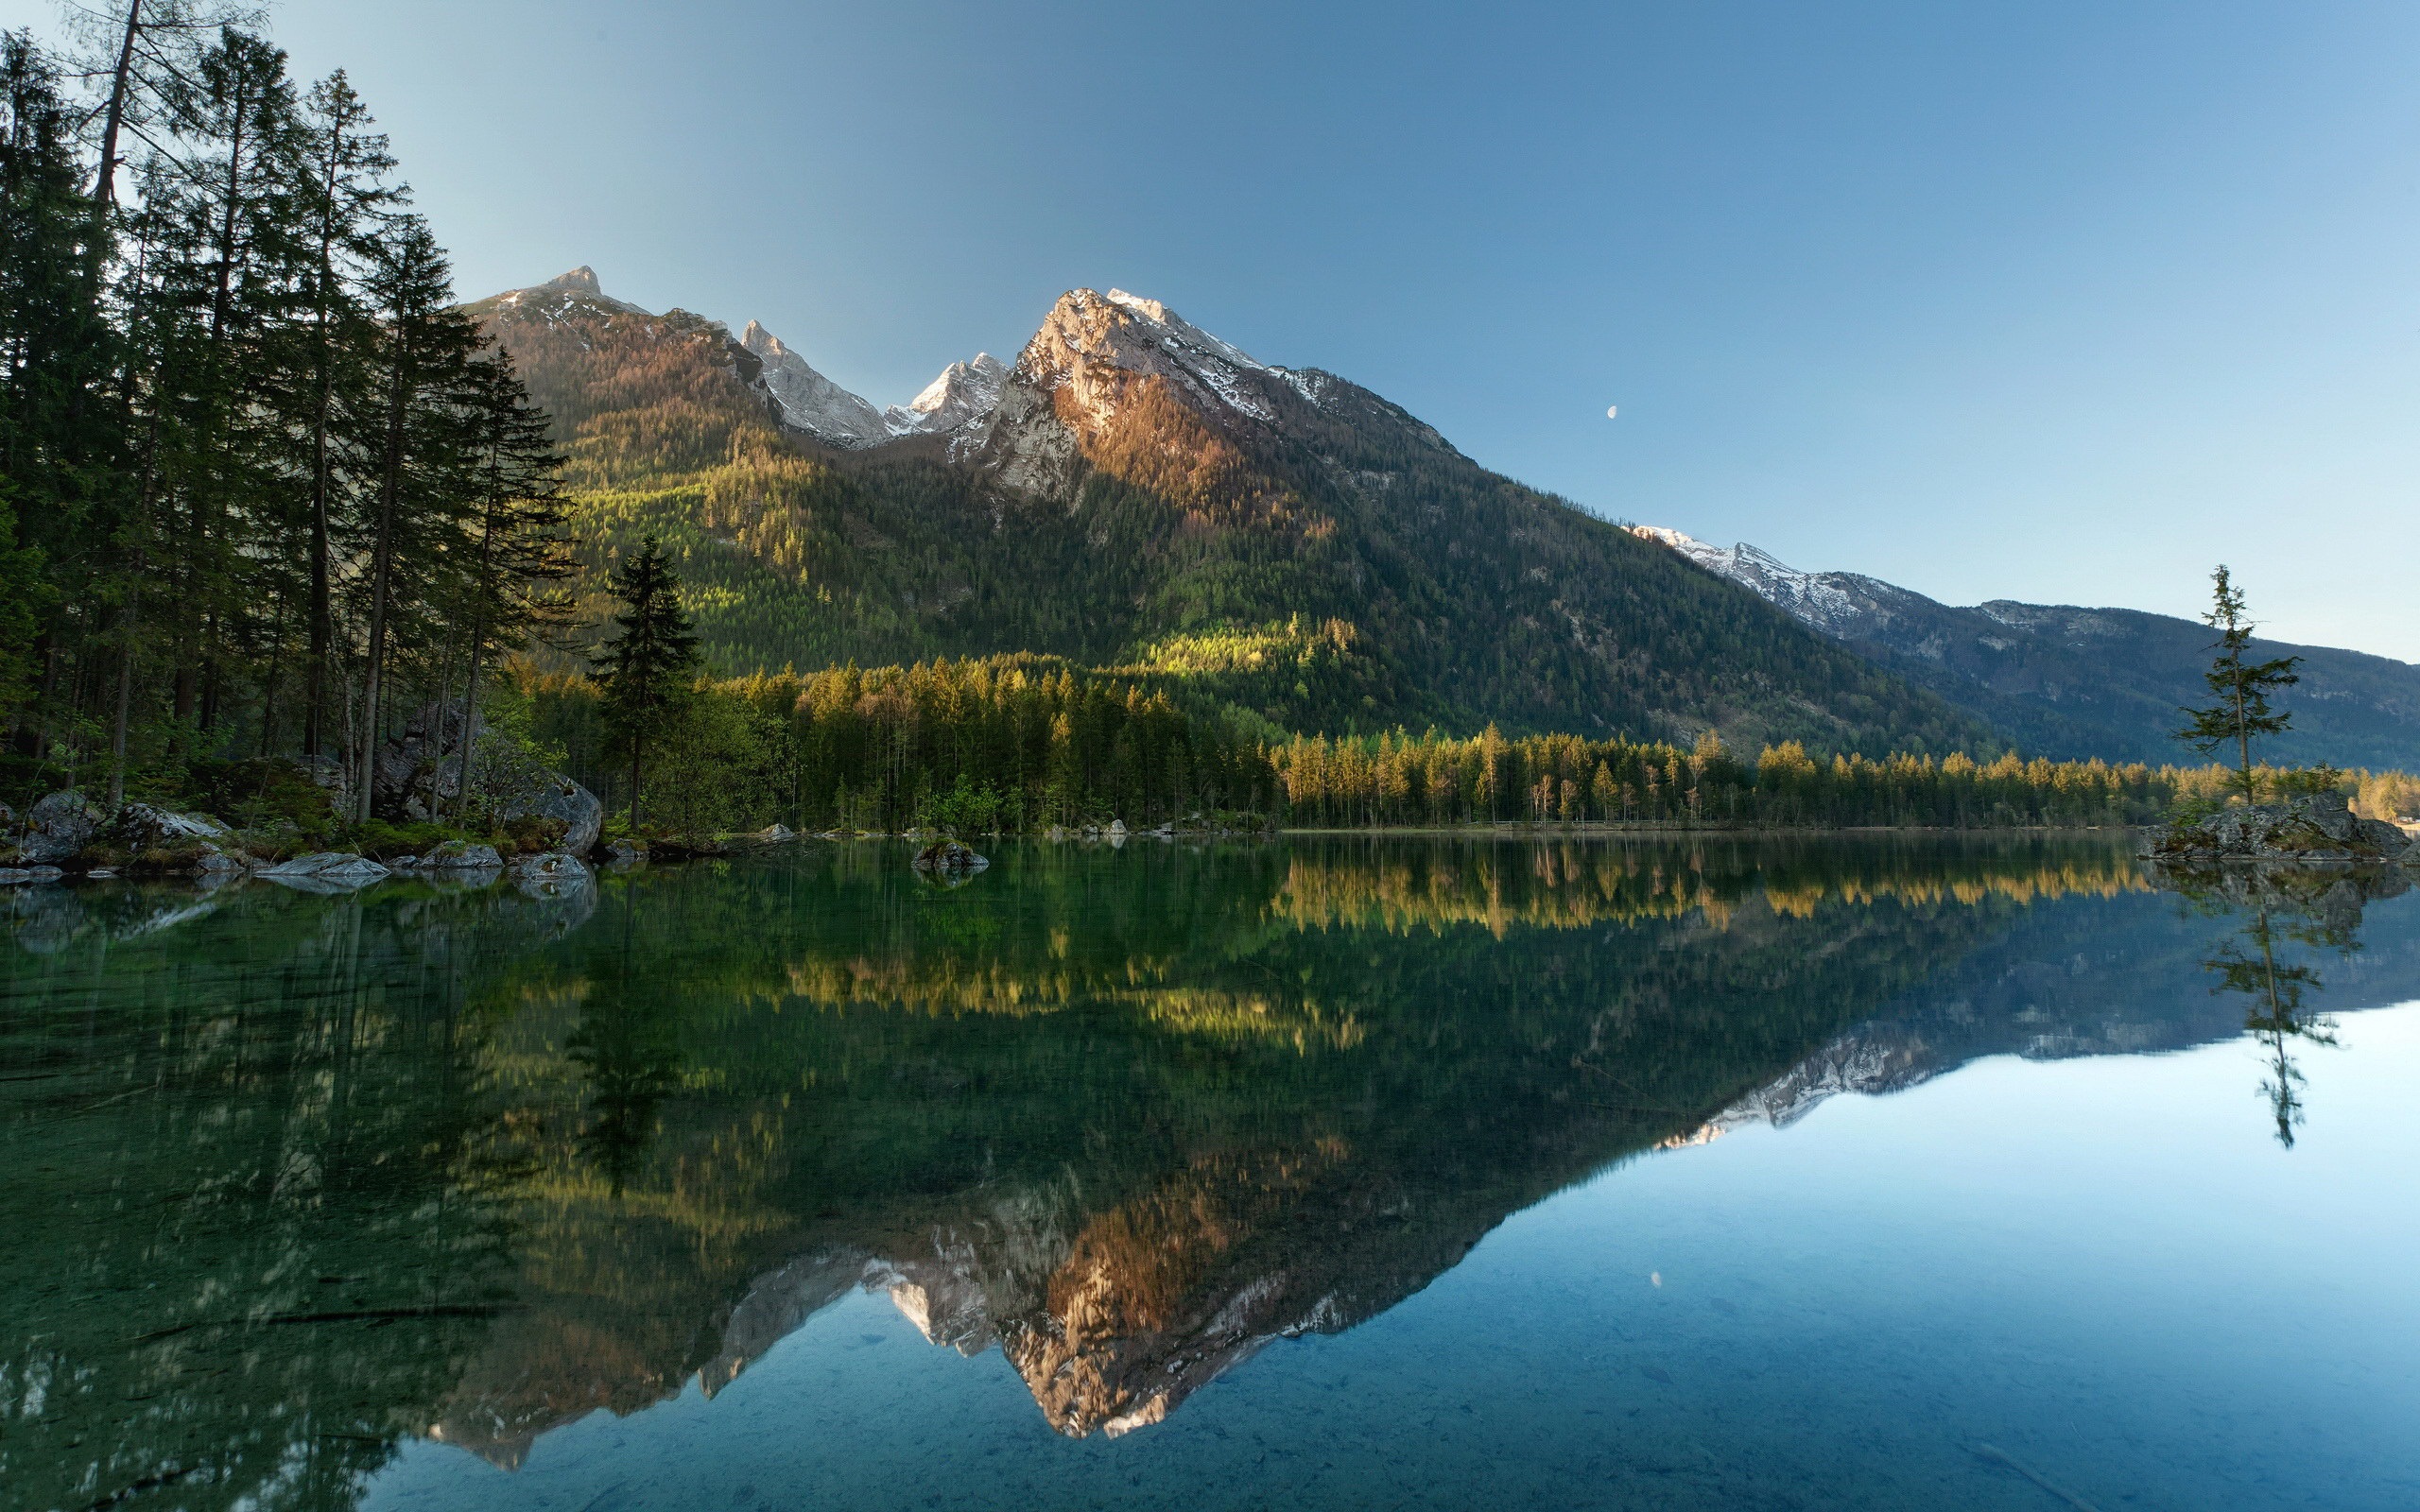 Reflection in the water natural scenery wallpaper #8 - 2560x1600